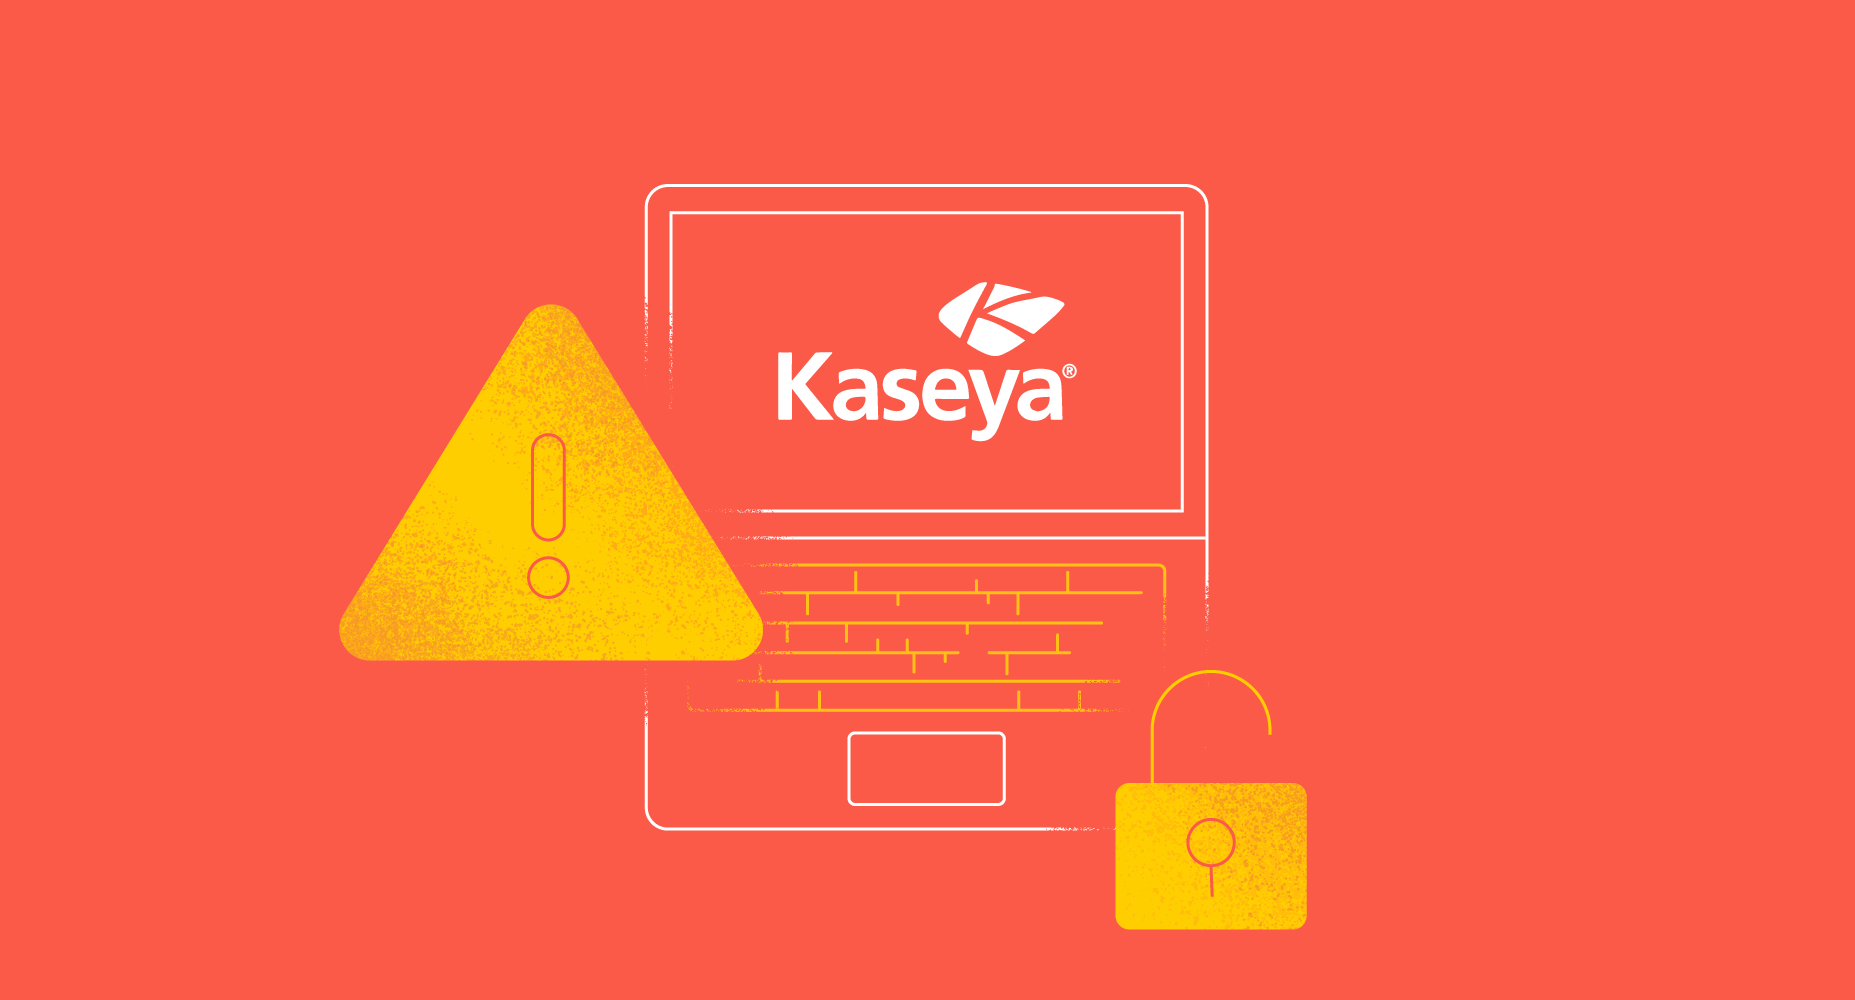 Featured Image for Kaseya Ransomware attack: Respond now to protect your organization